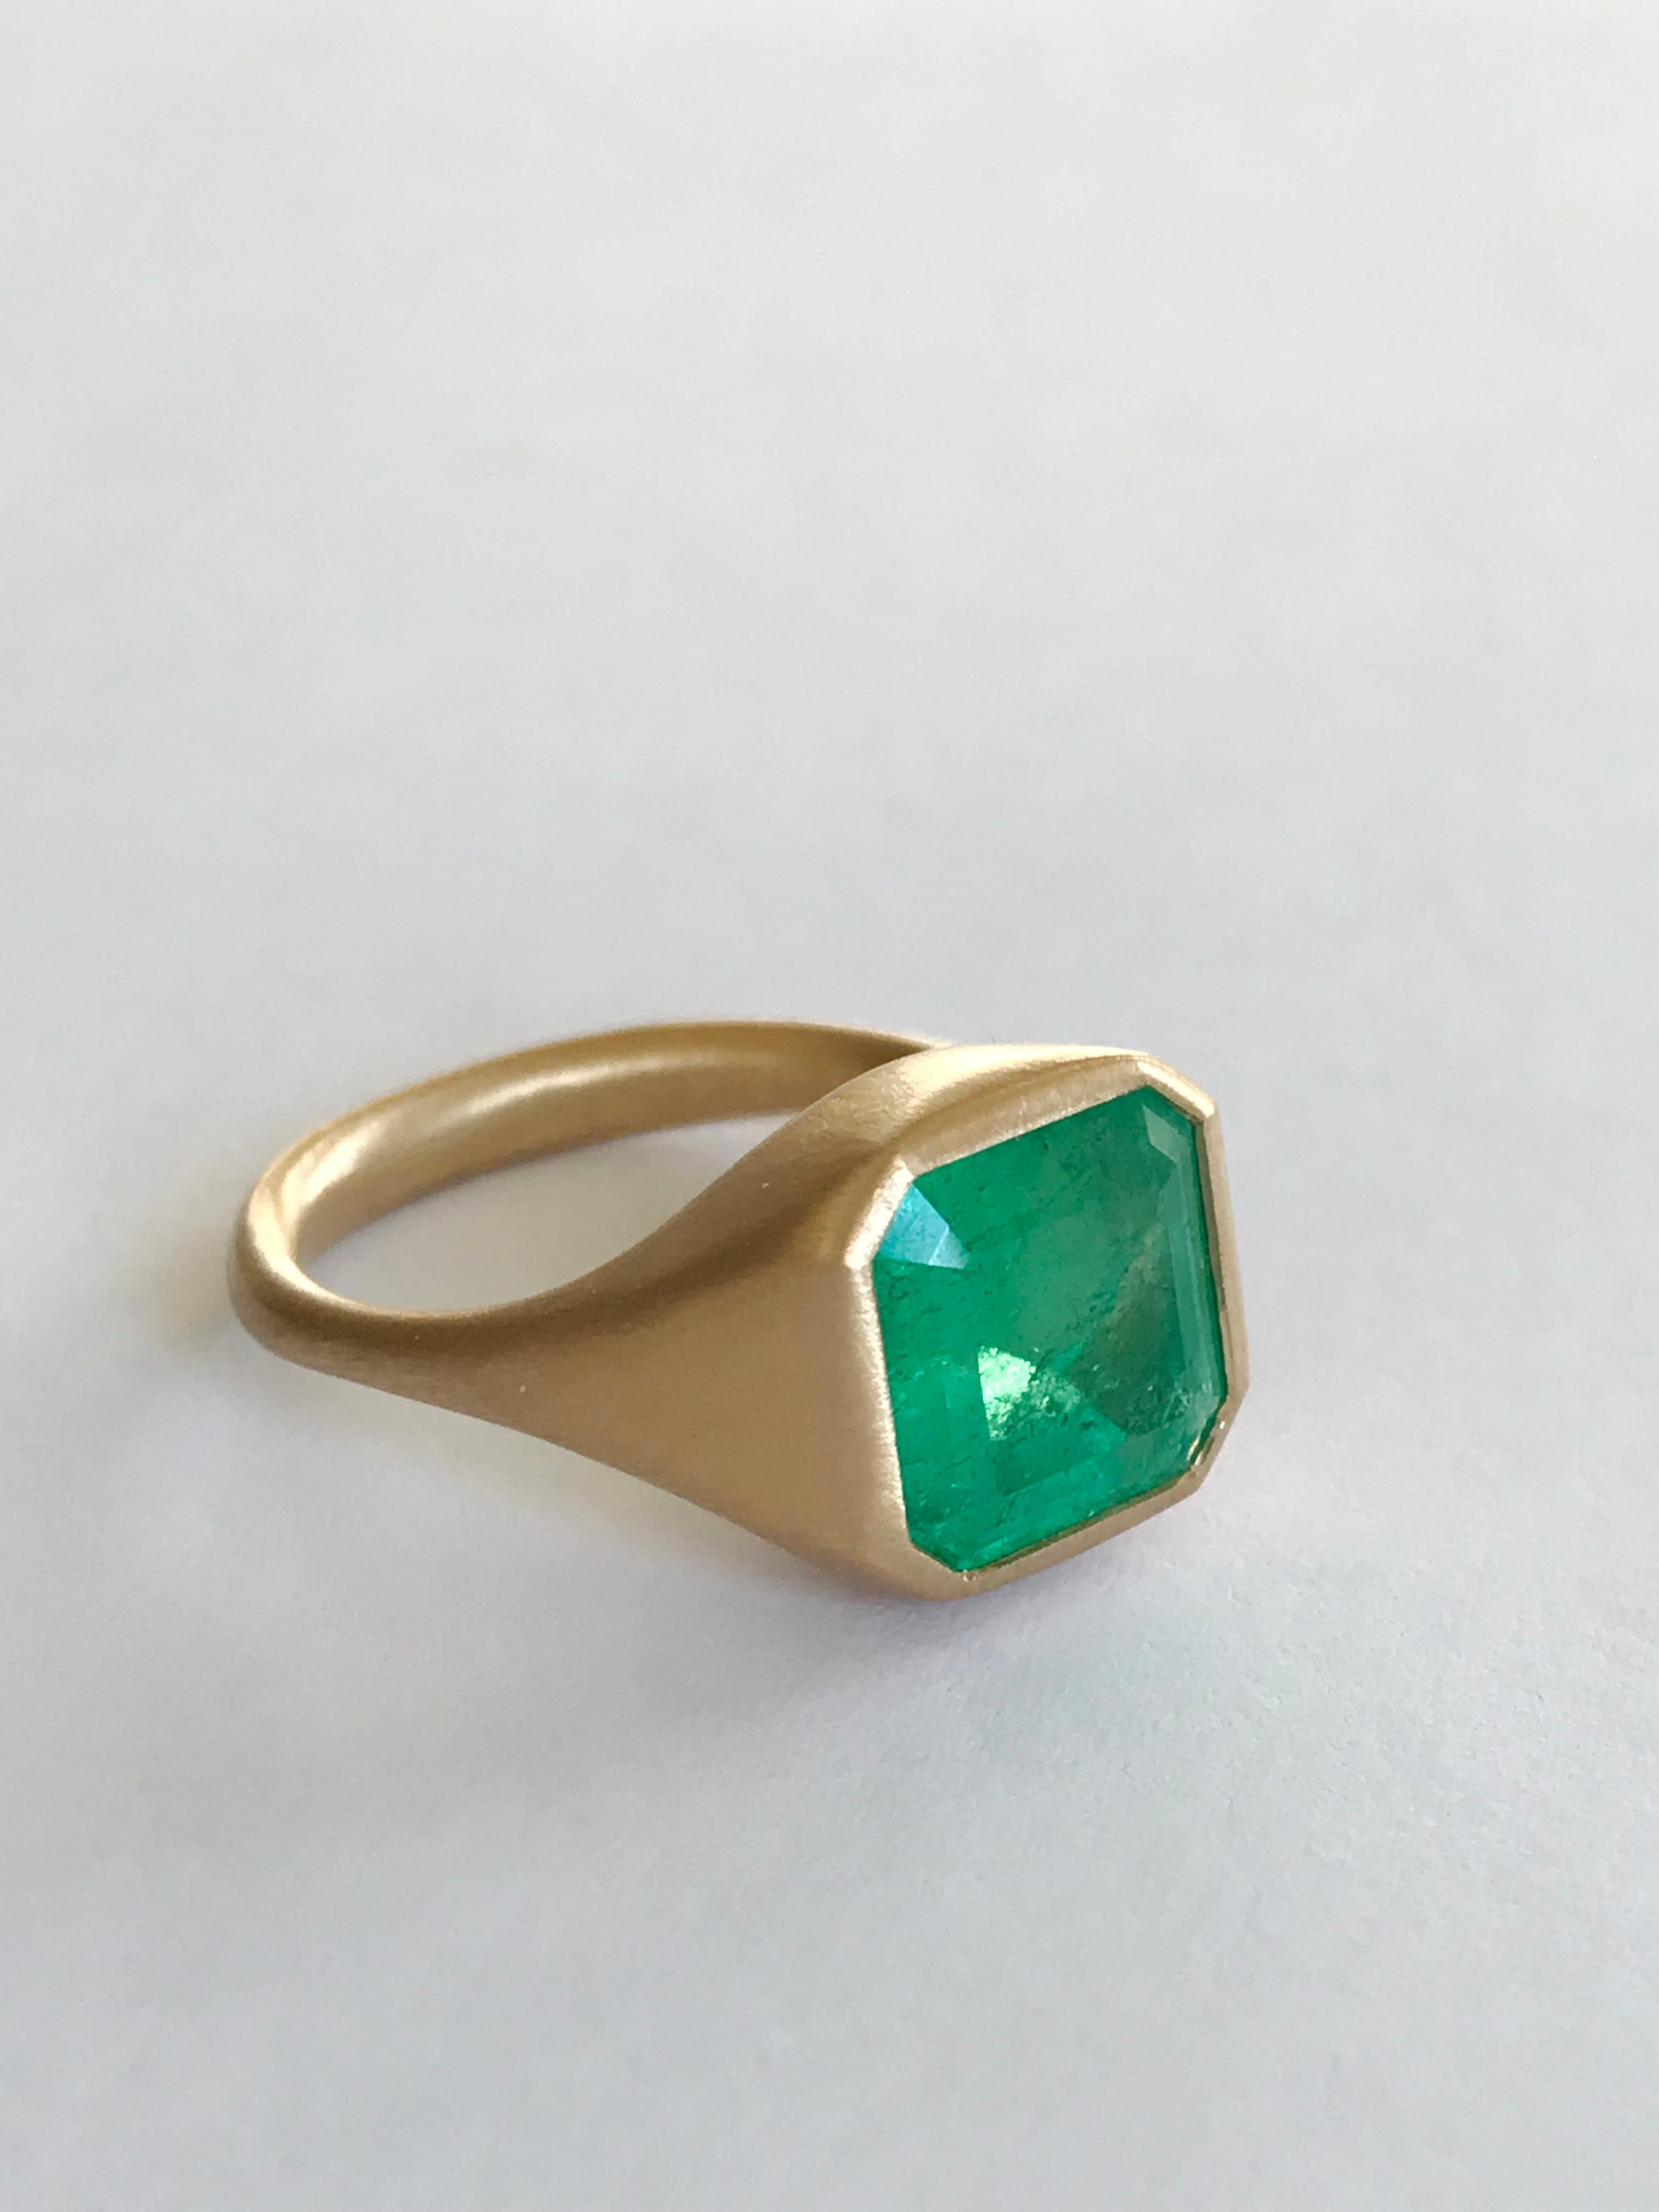 Dalben 4, 12 Carat Colombian Emerald Yellow Gold Ring For Sale 1